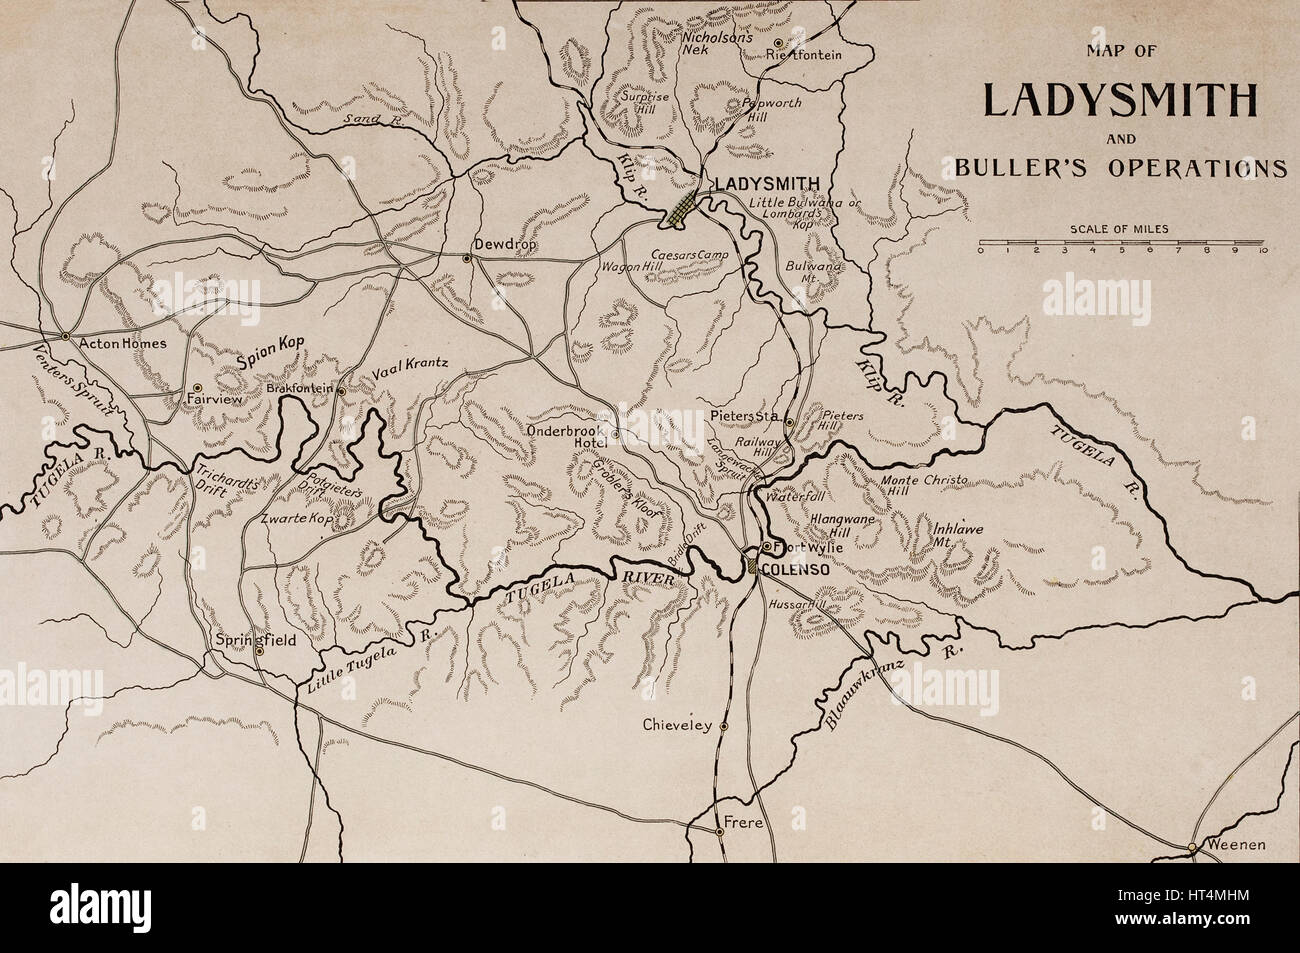 Map of Ladysmith and Buller's Operations - Boer War Stock Photo